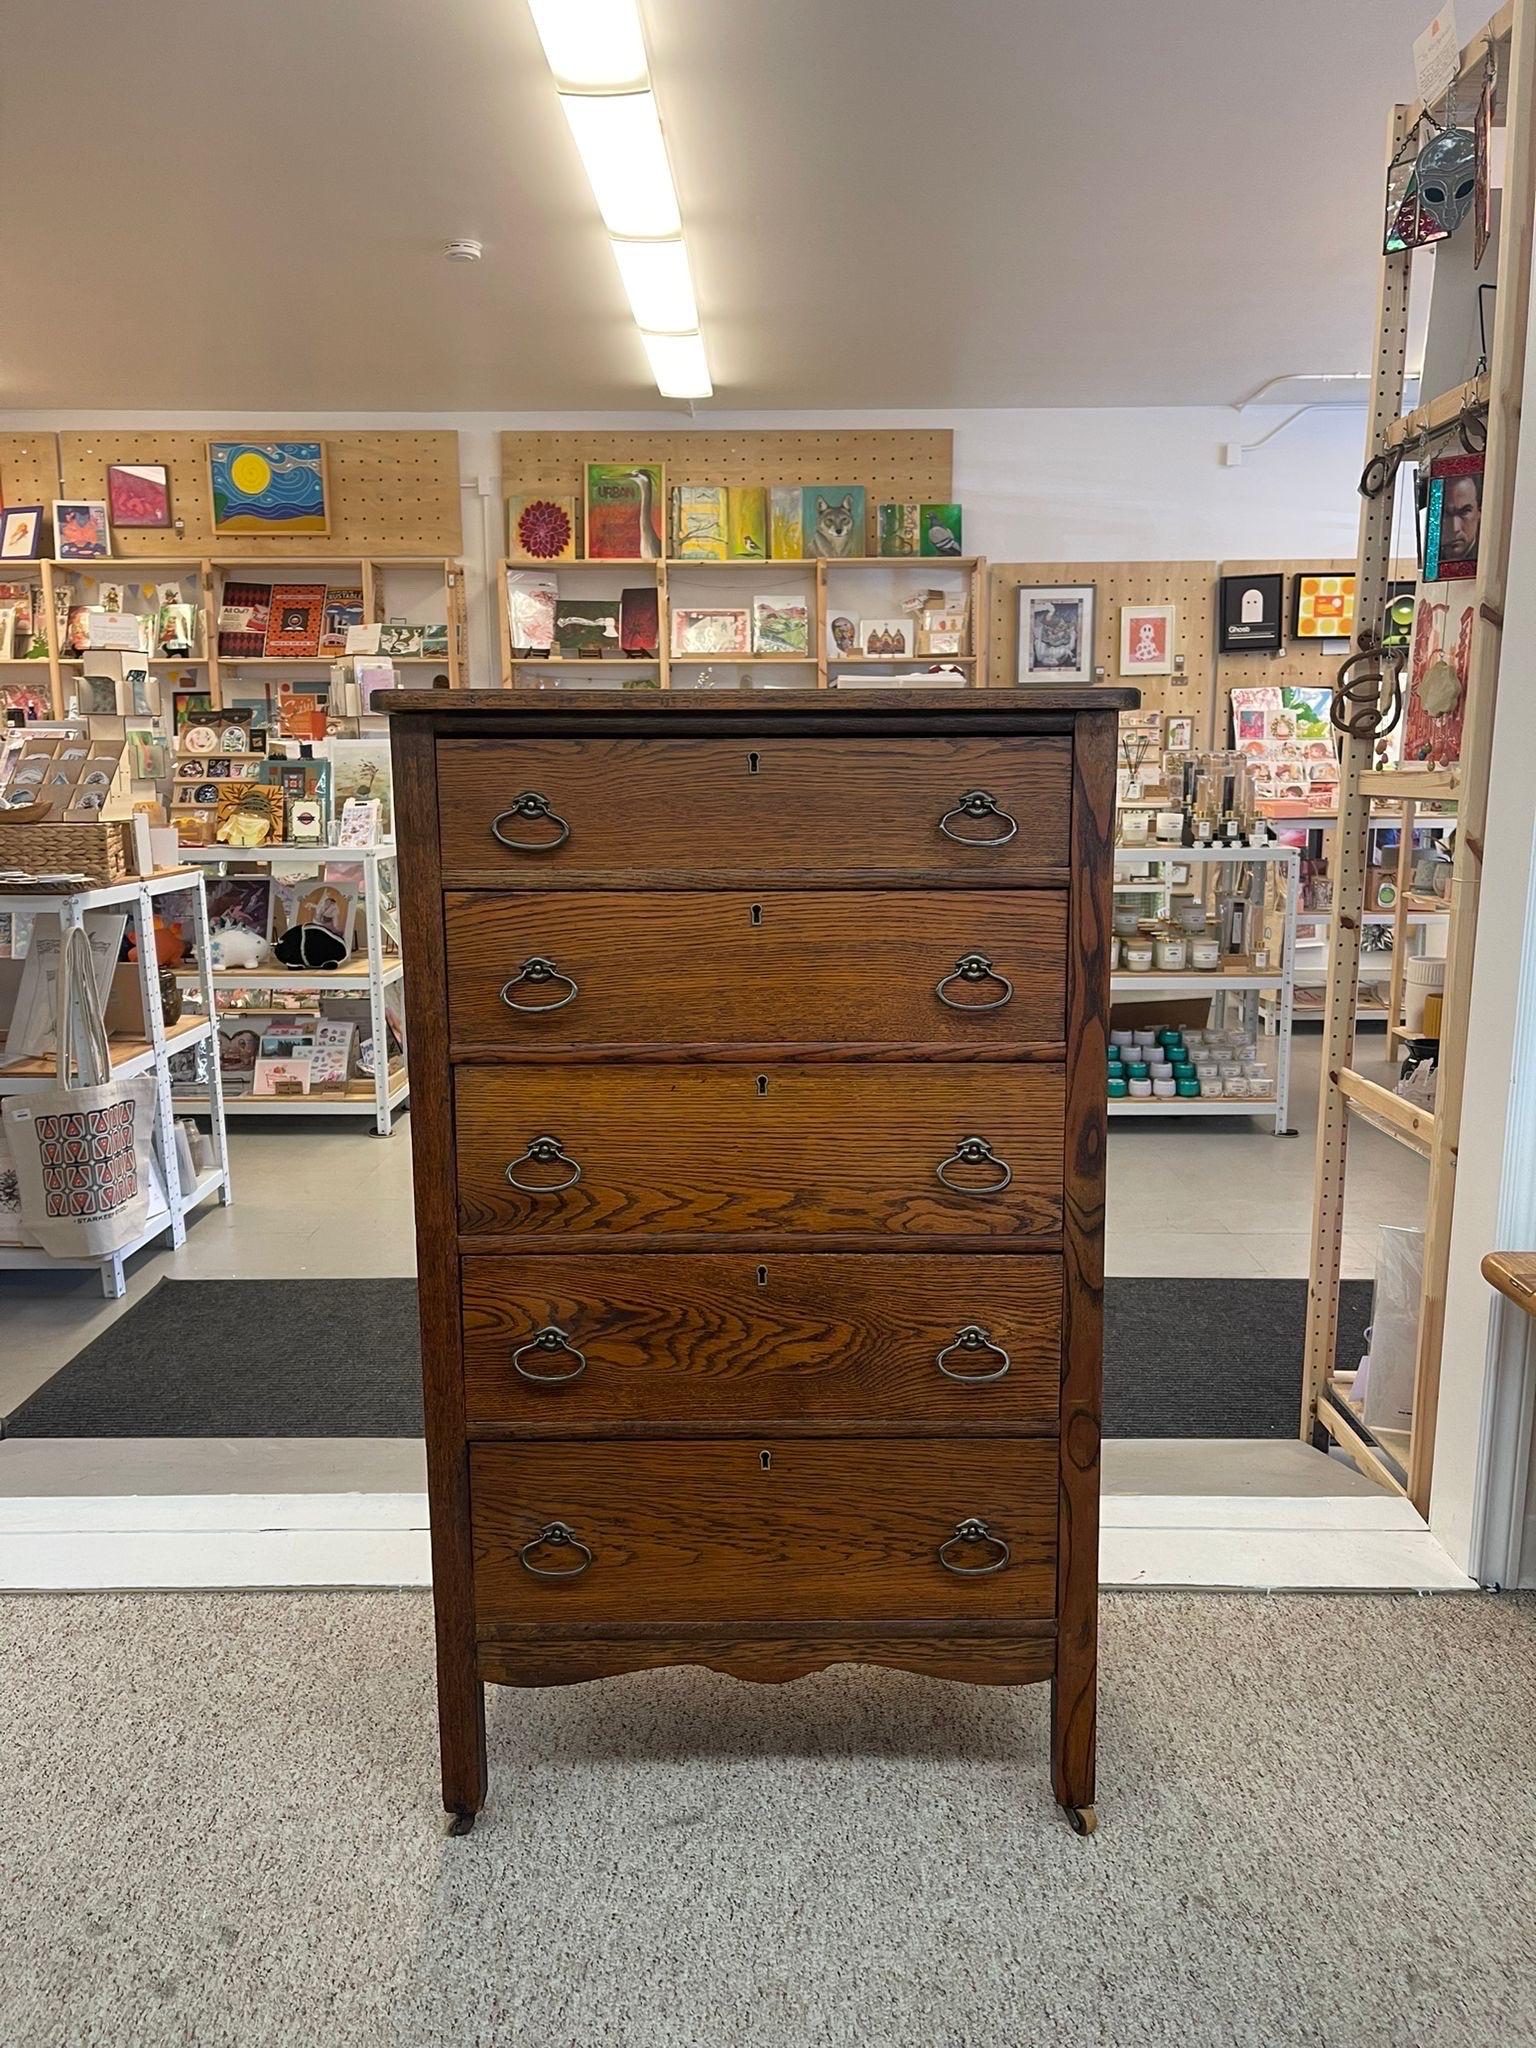 This dresser has beautiful wood grain, original hardware and rolls on casters. Dovetailed Drawers. Vintage Condition Consistent with Age as Pictured.

Dimensions. 29 W ; 18 D ; 47 H